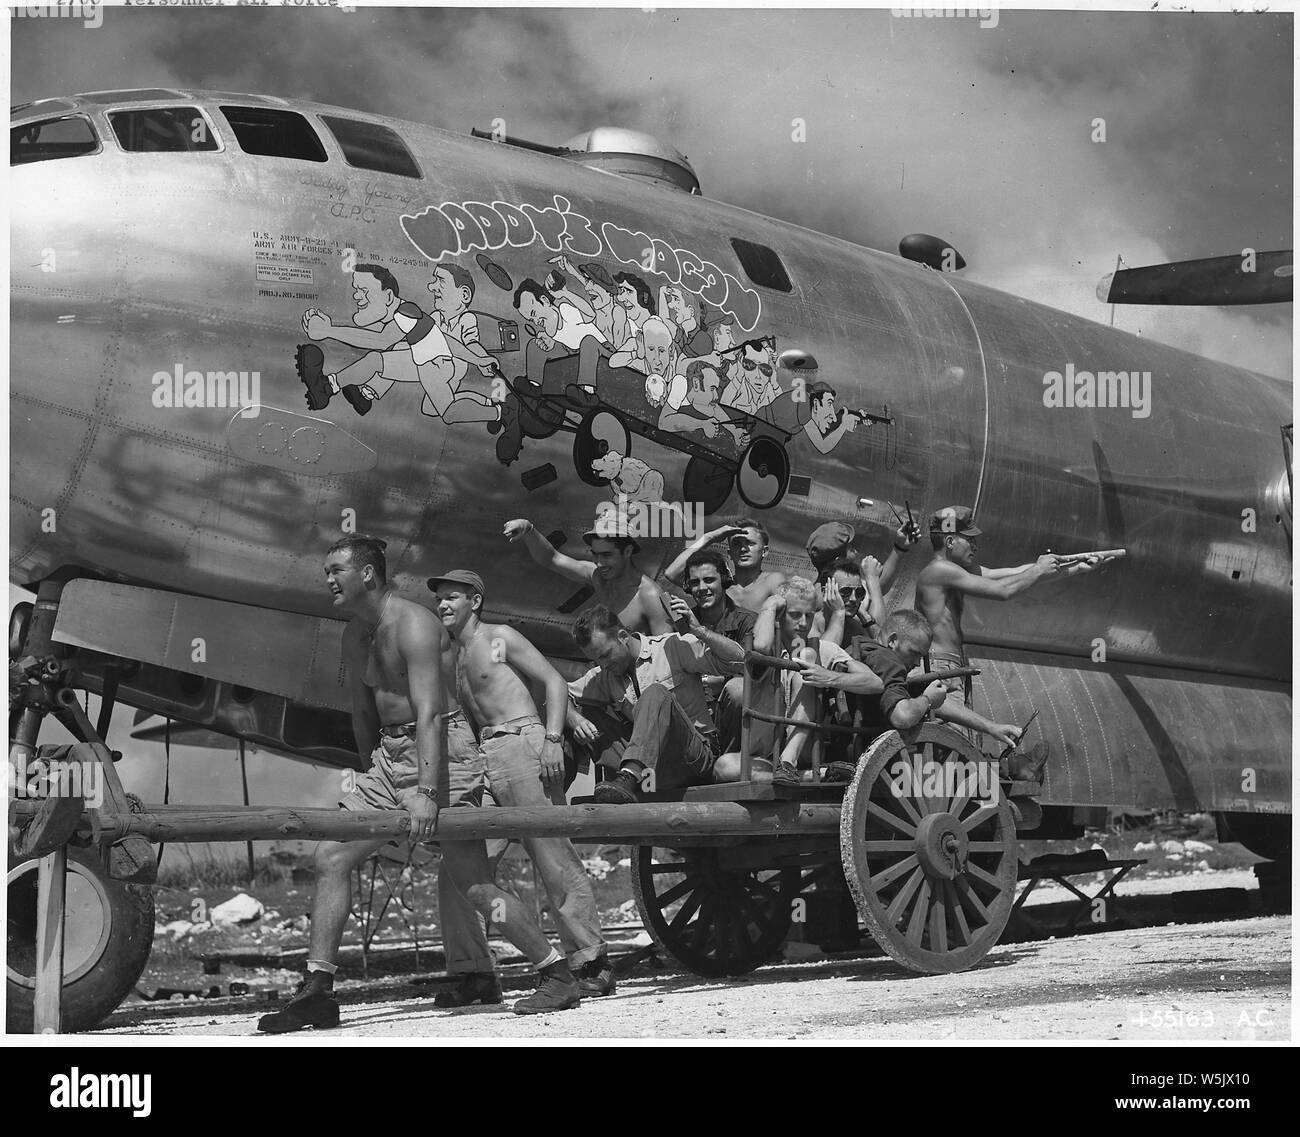 Air Force personnel & equipment. The Pacific, England, Wash. DC. 1942-44 (mostly 1943); Scope and content:  B-29 Men bombed Tokyo. The crew of Waddy's Wagon, fifth B-29 to take off on the initial Tokyo mission from Saipan, and first to land after bombing the target. Crew members, posing here to duplicate their caricatures on the plane, are : Plane C. O., Capt. Walter R. Waddy Young, Ponca City, Okla., former All-American end; Lt. Jack H. Vetters, Corpus Christi, Texas, pilot; Lt. John F. Ellis, Moberly, Mo., bombardier; Lt. Paul R. Garrison, Lancaster, Pa., navigator; Sgt. George E. Avon, Syra Stock Photo